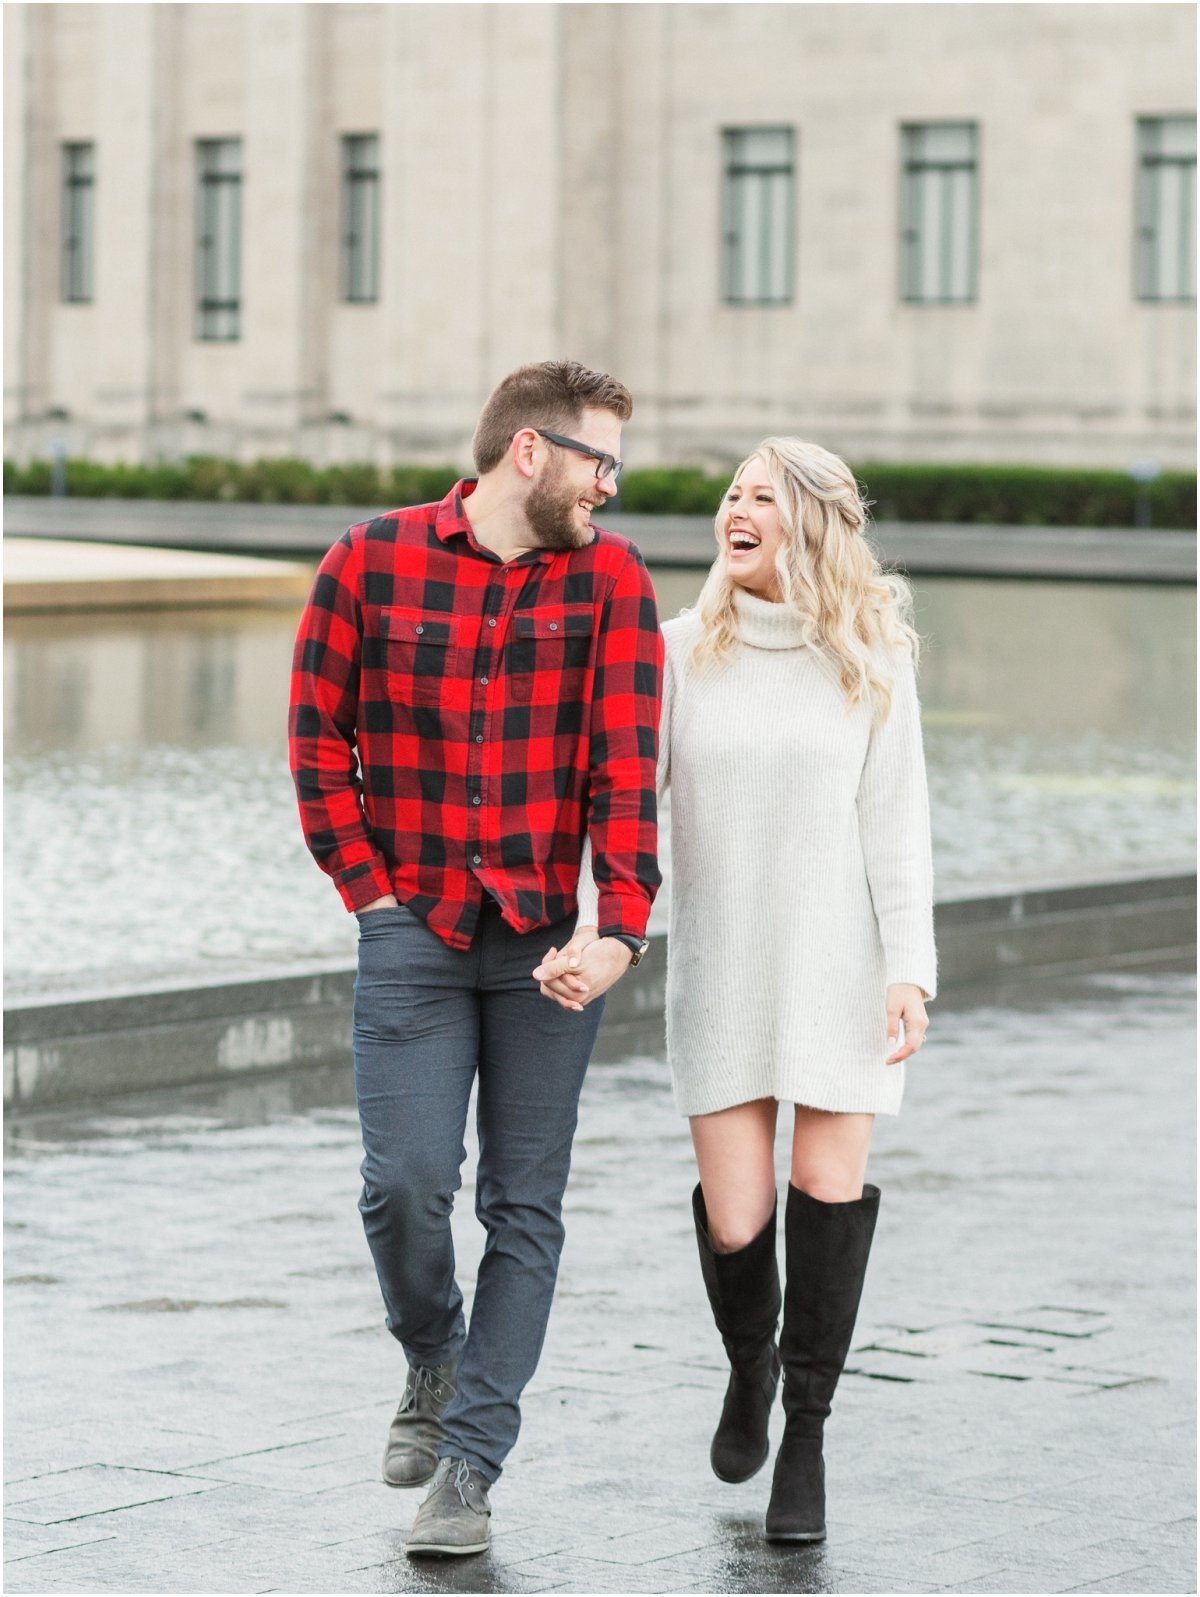 Nelson_Atkins_Museum_Engagement_Session_By_Bianca_Beck_Photography_Kansas_City_Wedding_Photographer__0070